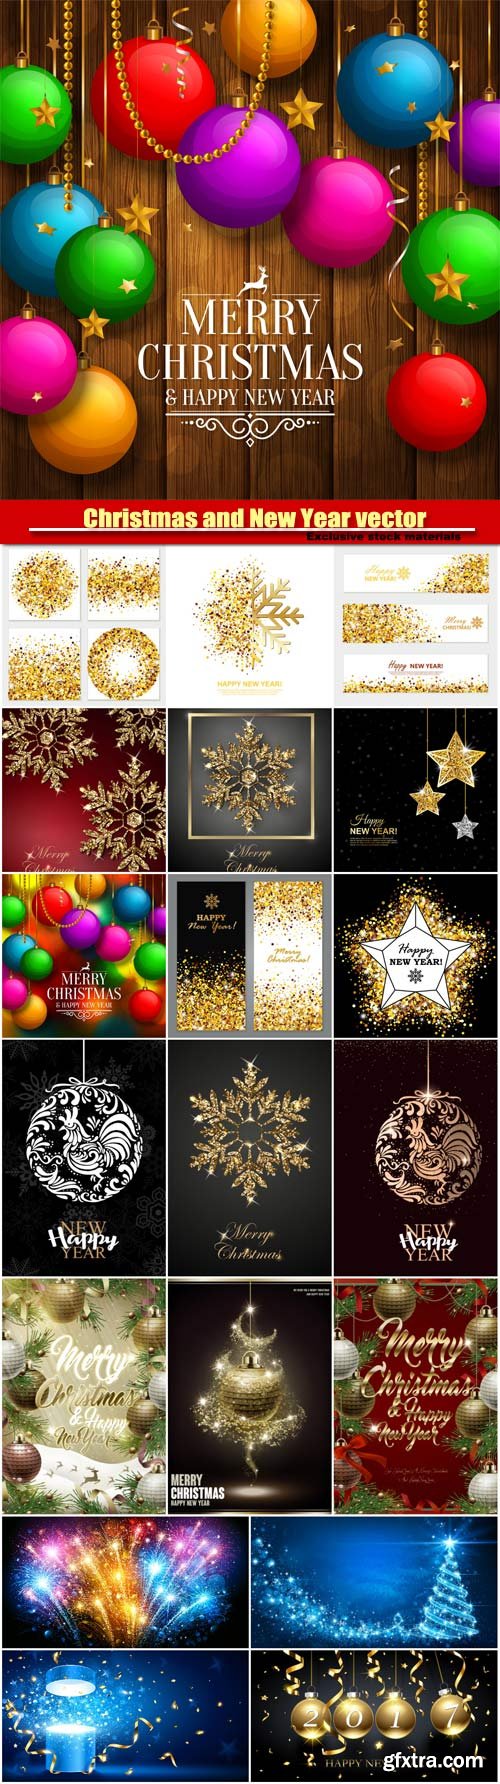 Christmas and New Year vector background, colorful balls, golden stars